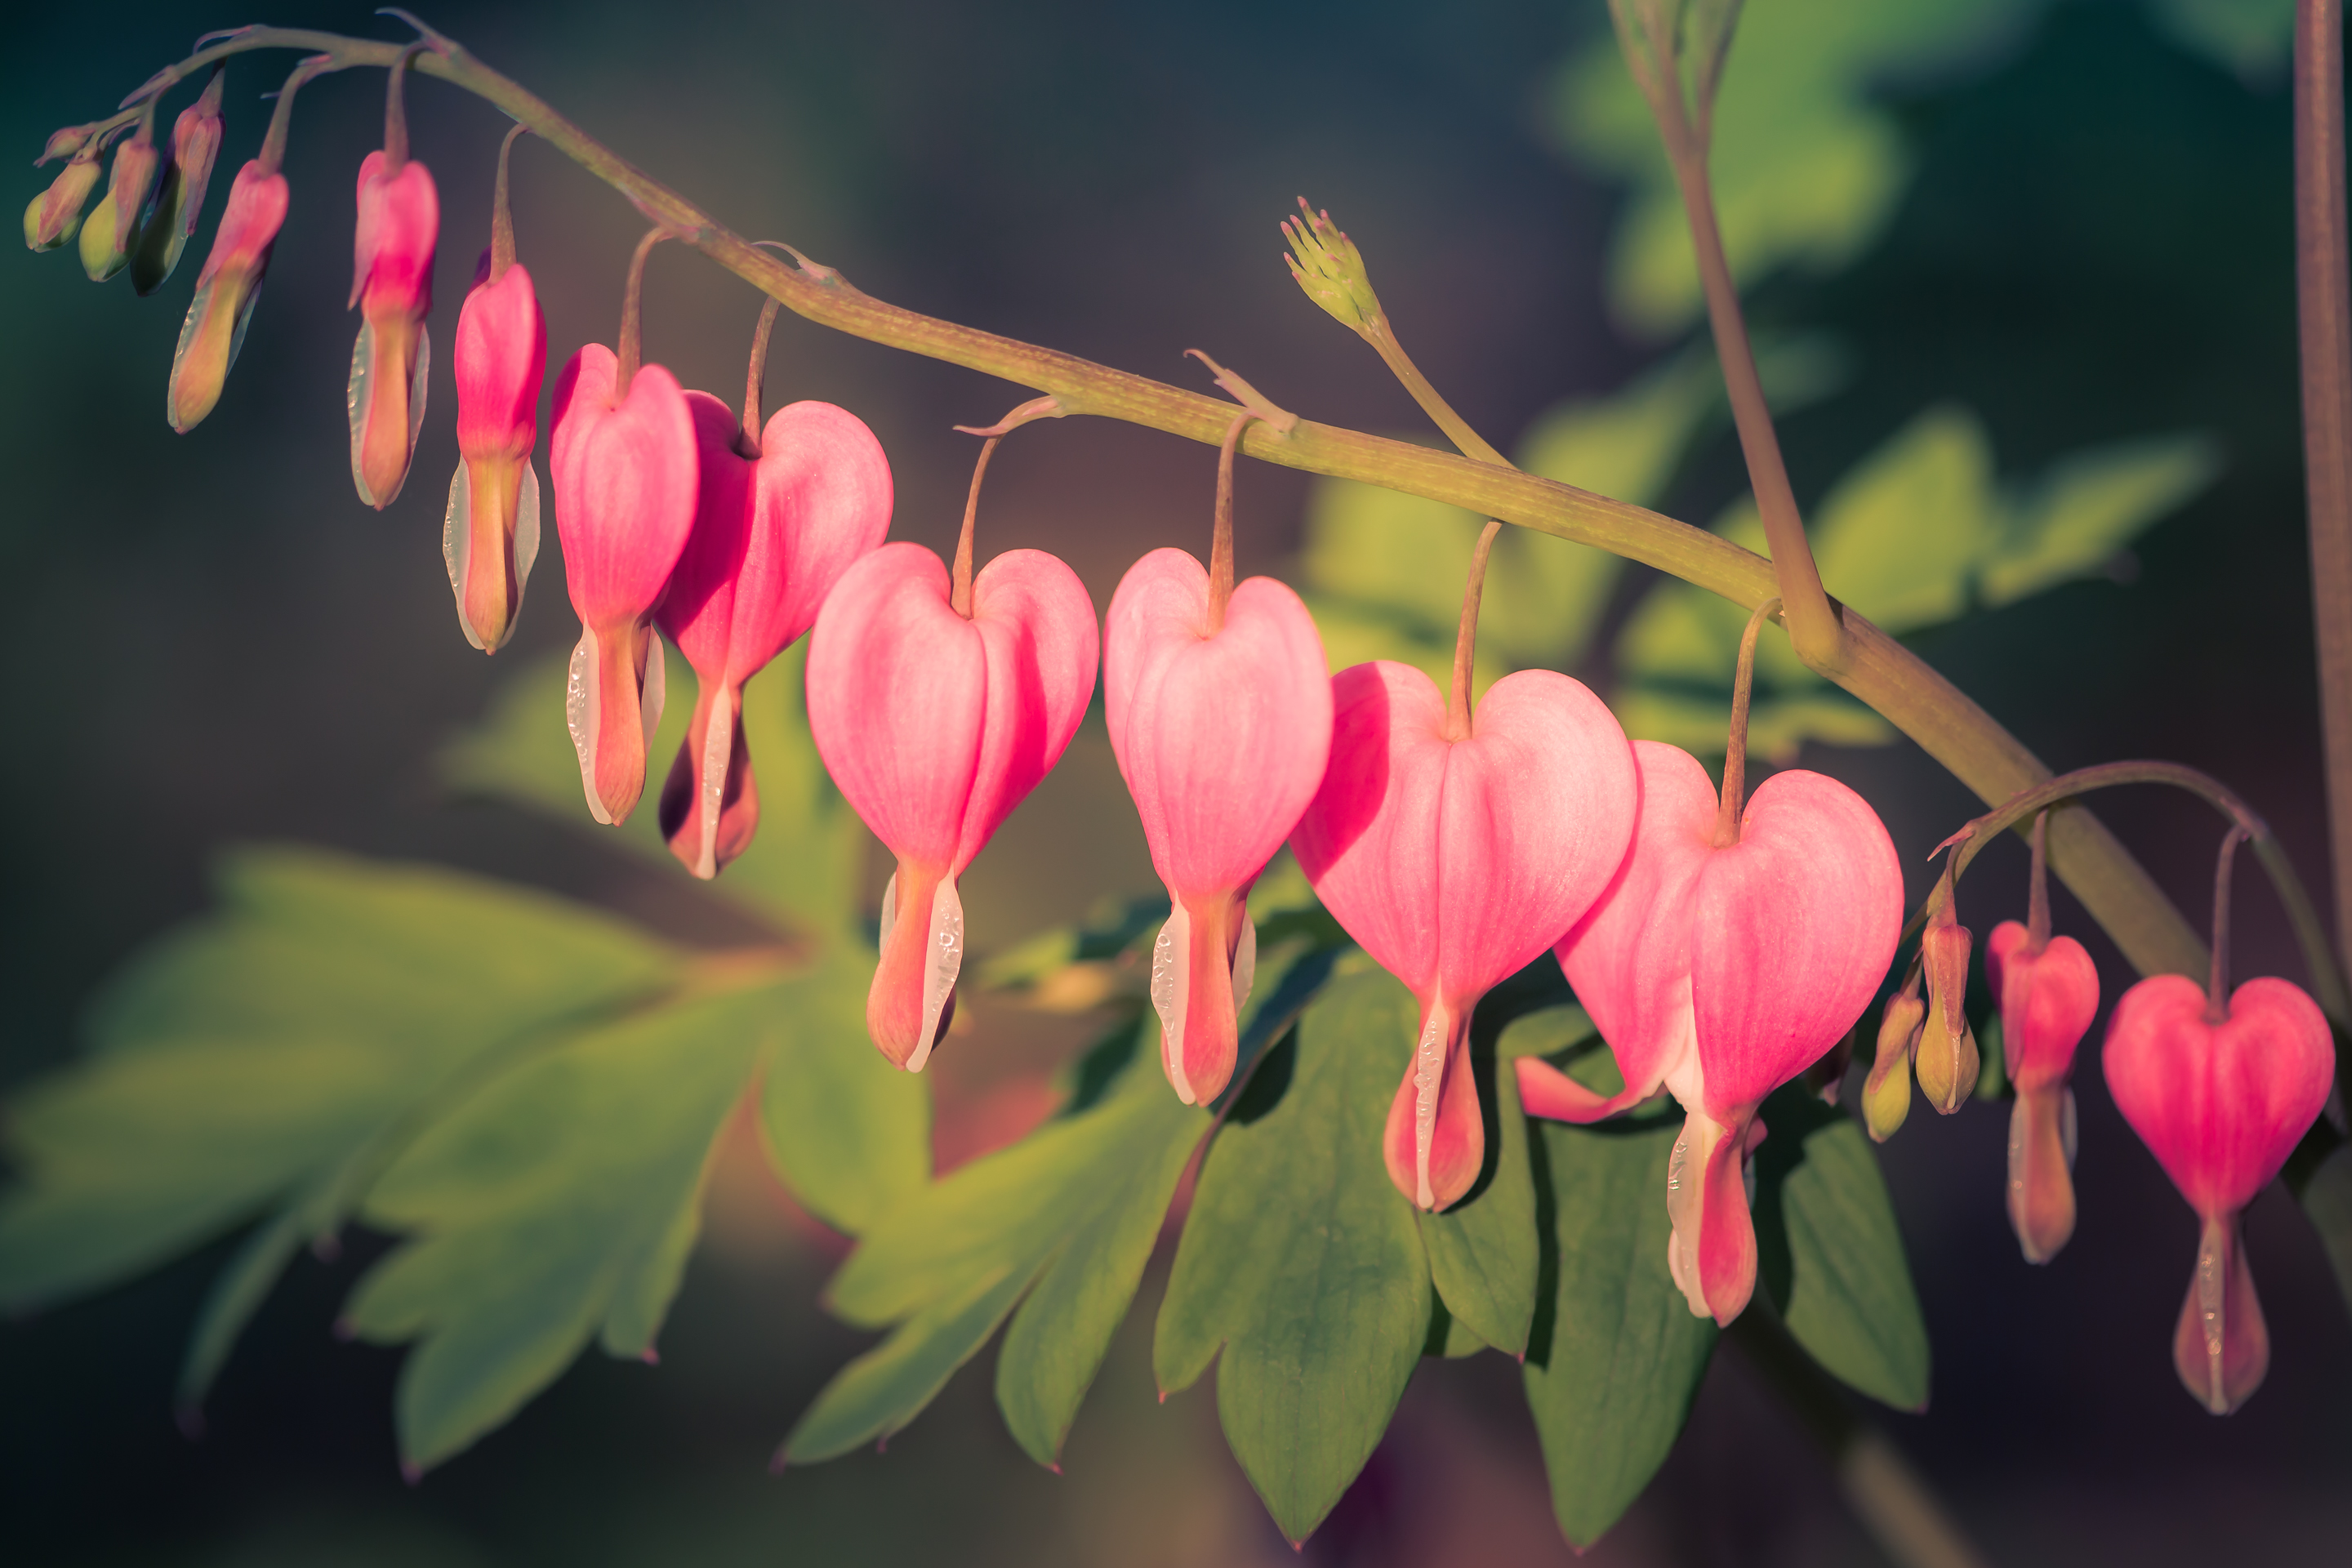 100mm macro photo of a multiple bleeding heart flowers hanging from its stem.